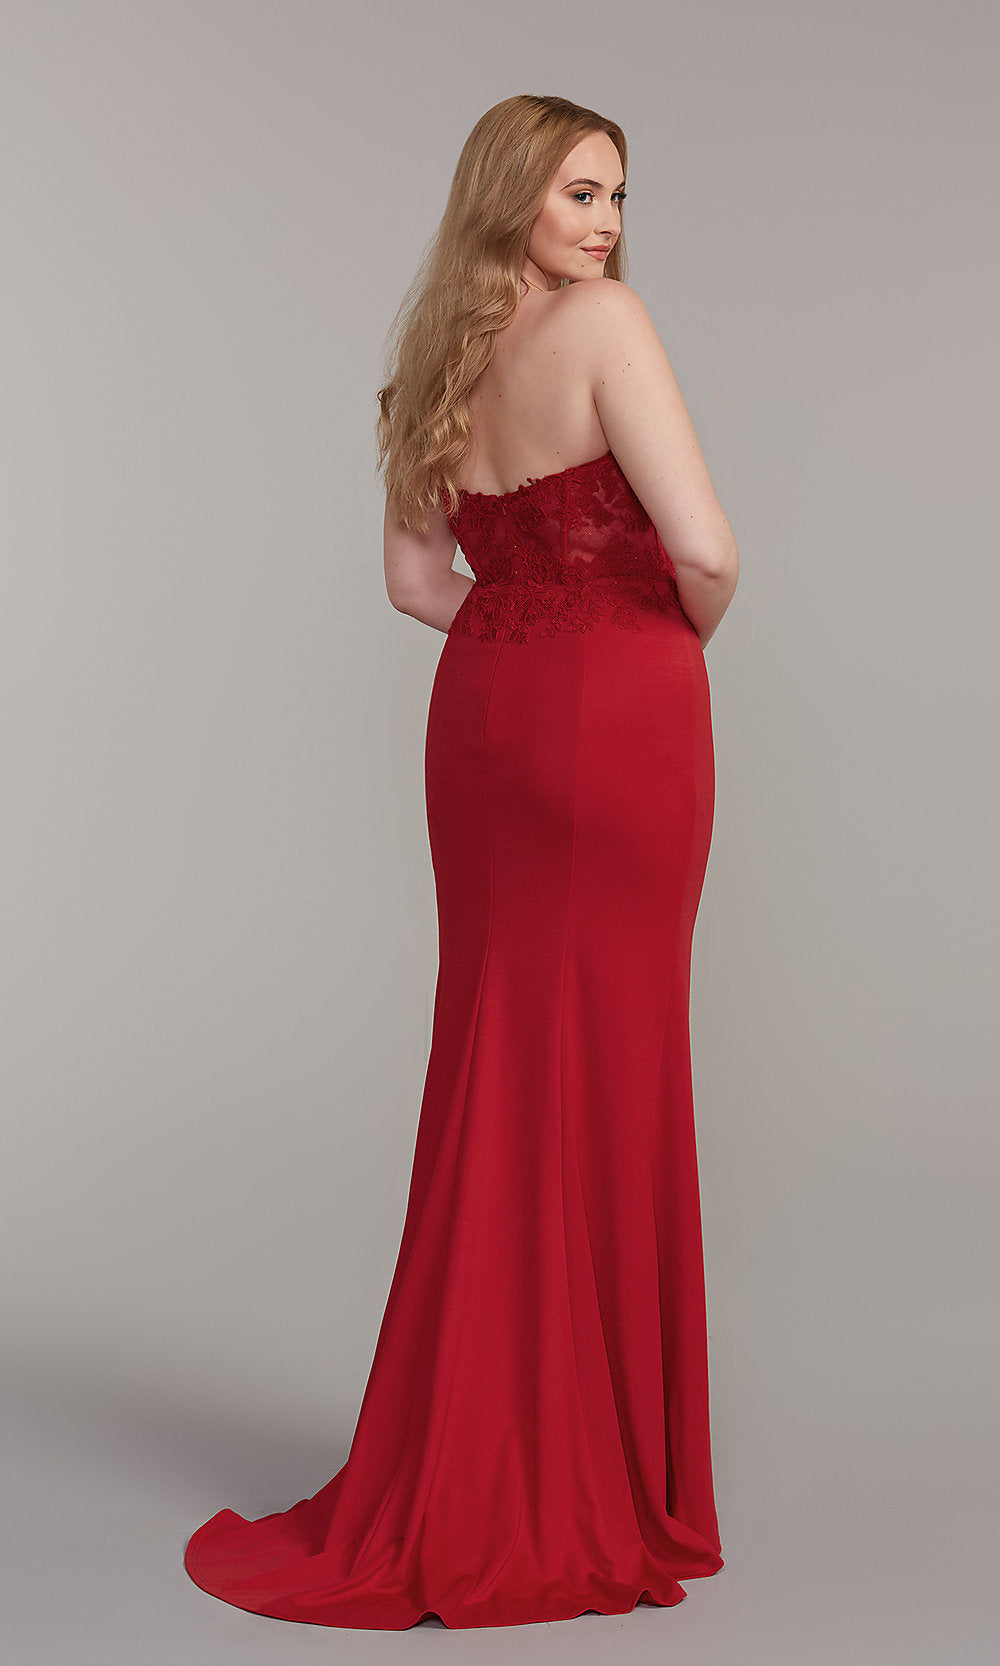  Embroidered-Bodice Strapless Long Formal Dress